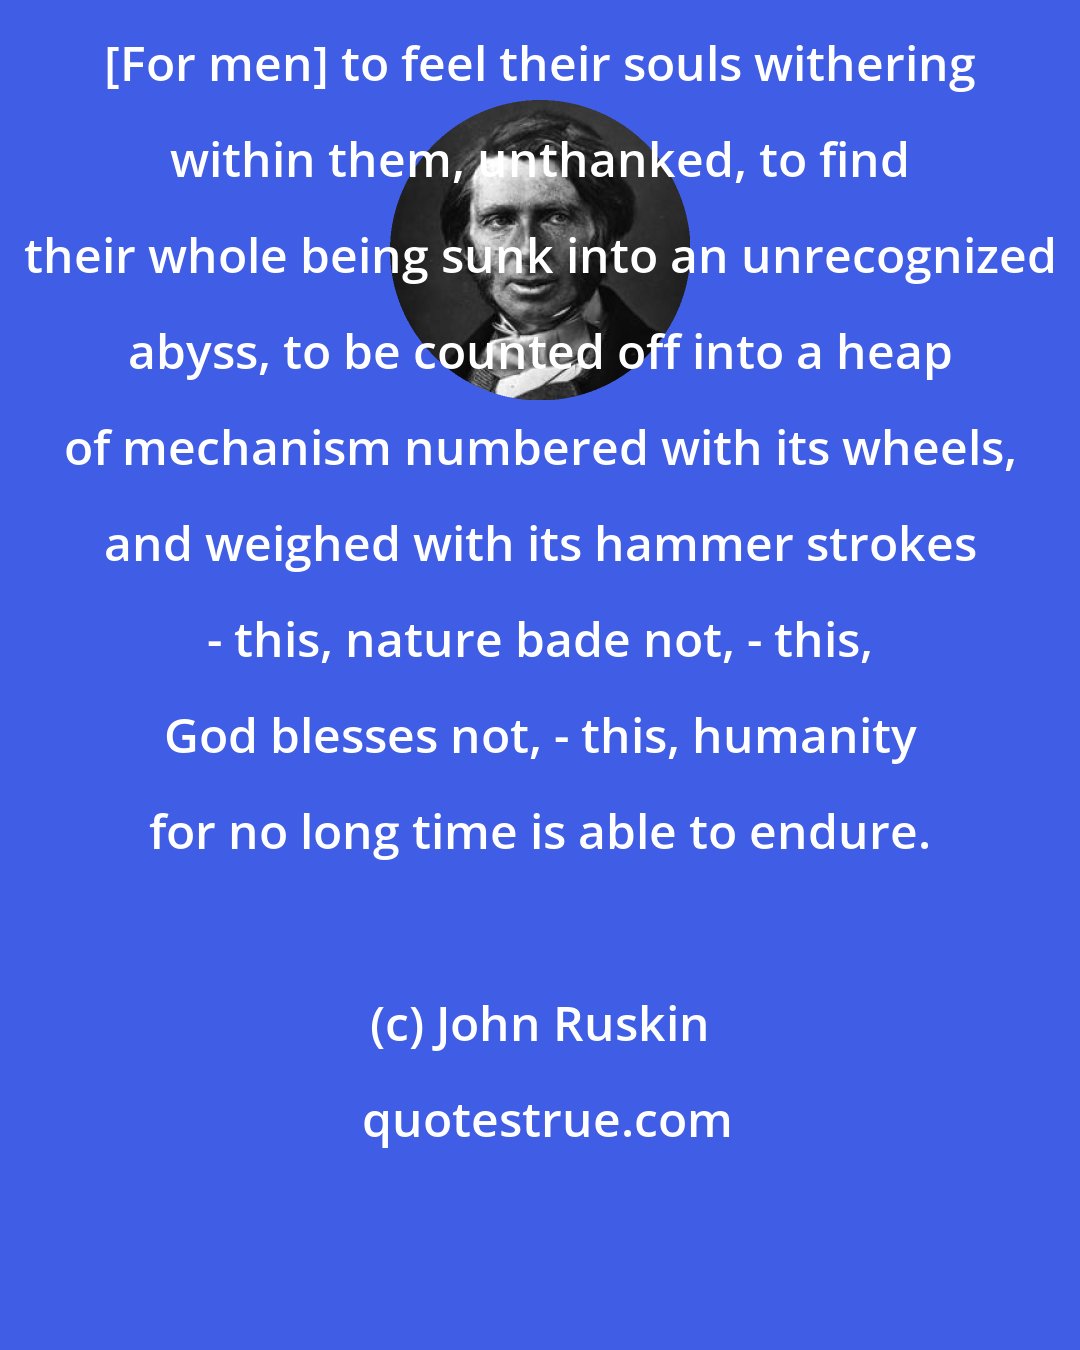 John Ruskin: [For men] to feel their souls withering within them, unthanked, to find their whole being sunk into an unrecognized abyss, to be counted off into a heap of mechanism numbered with its wheels, and weighed with its hammer strokes - this, nature bade not, - this, God blesses not, - this, humanity for no long time is able to endure.